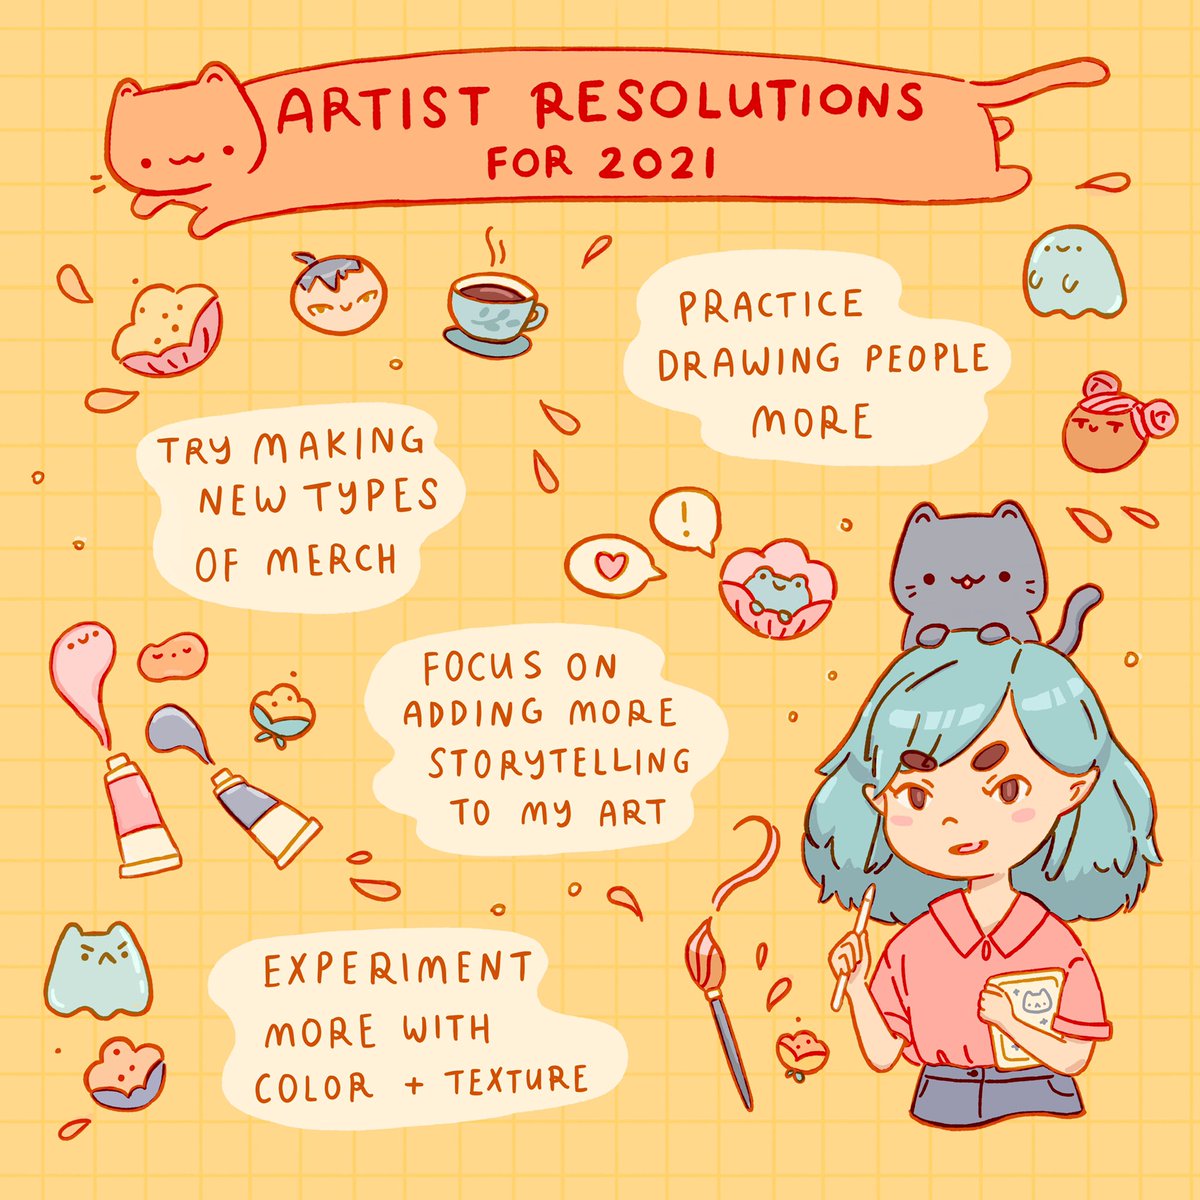 Slightly late but here are my artist resolutions for the year ✨ 

(2021 vs 2020) 